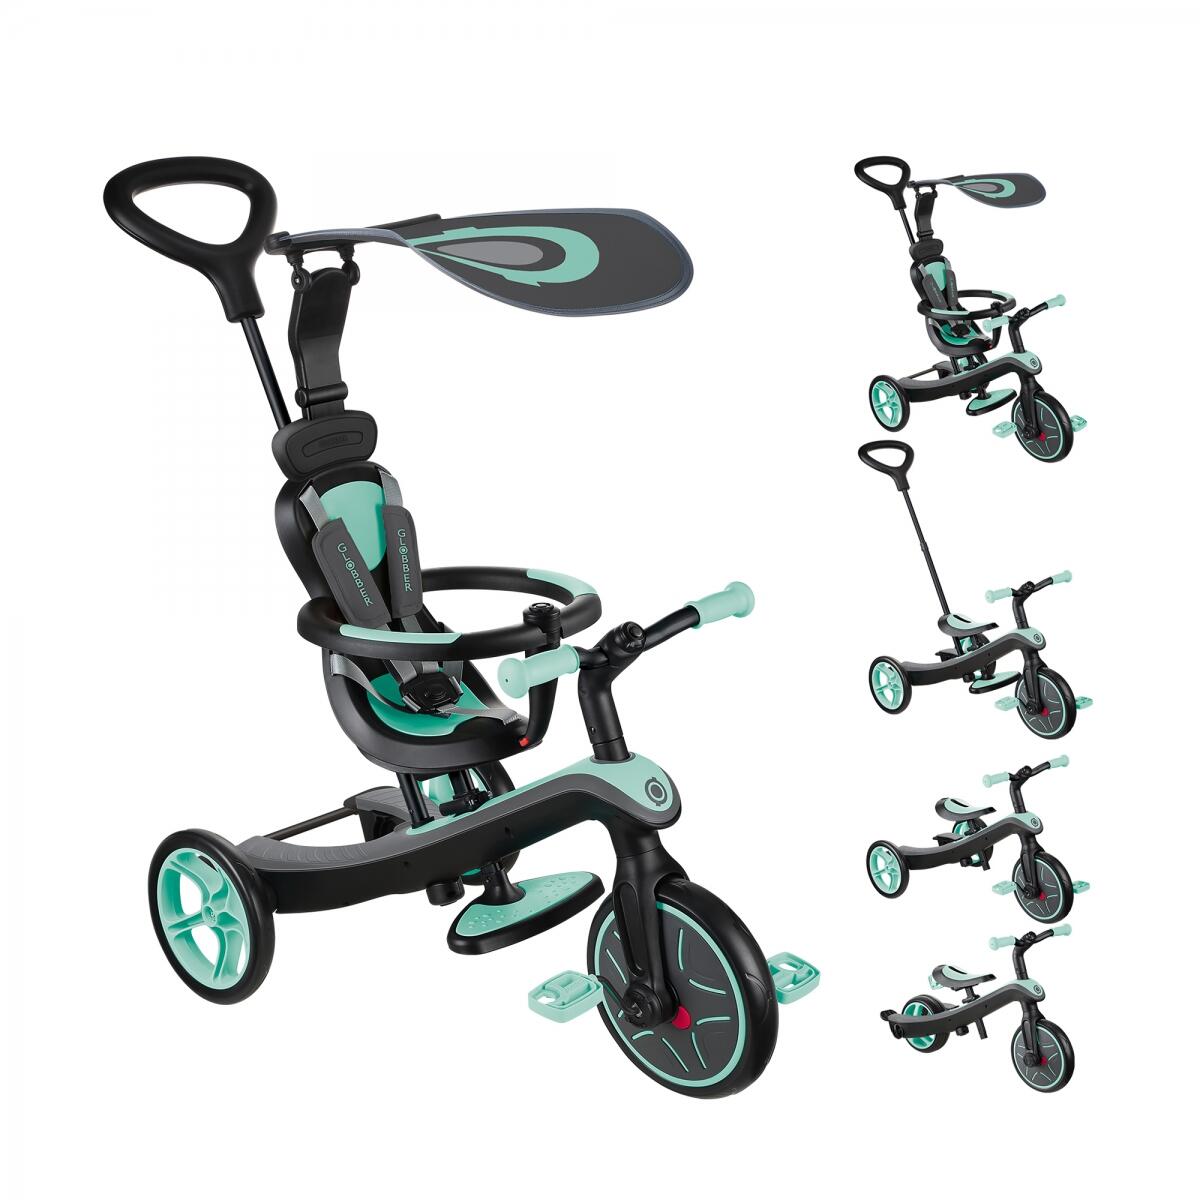 Globber Explorer Trike 4 in 1 with Parent Handle - Mint 1/5